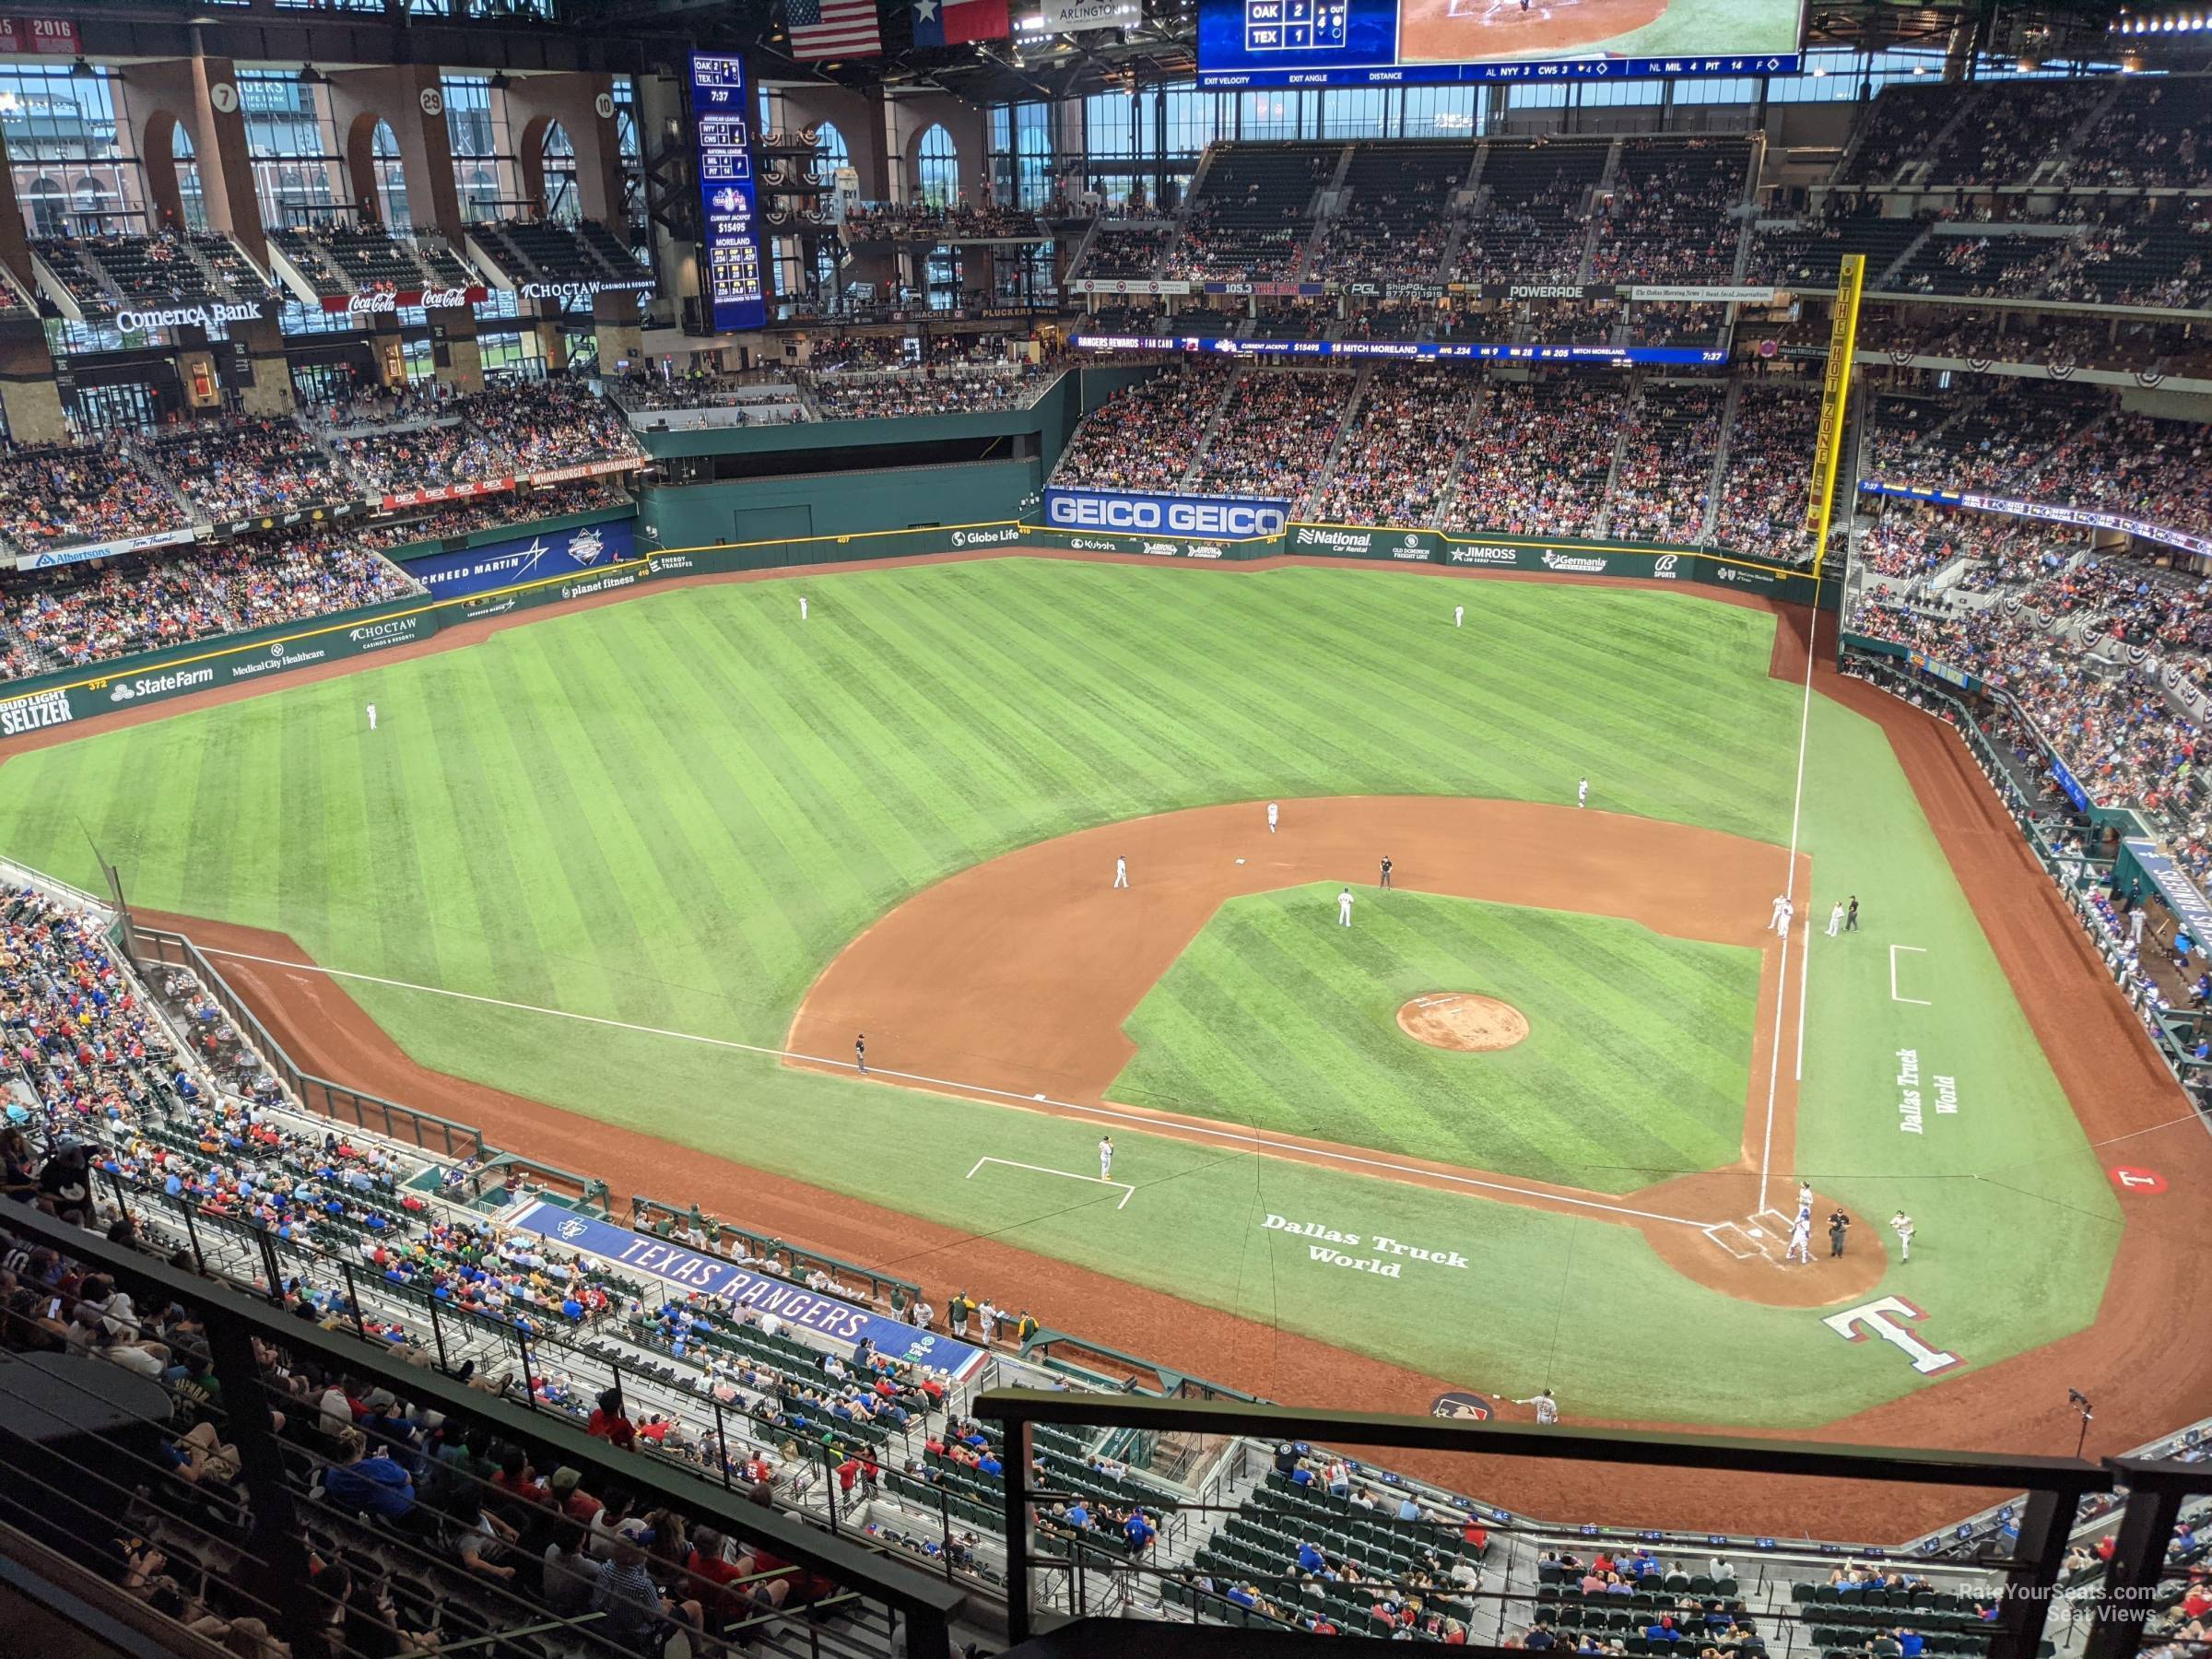 Section 309 at Globe Life Field 